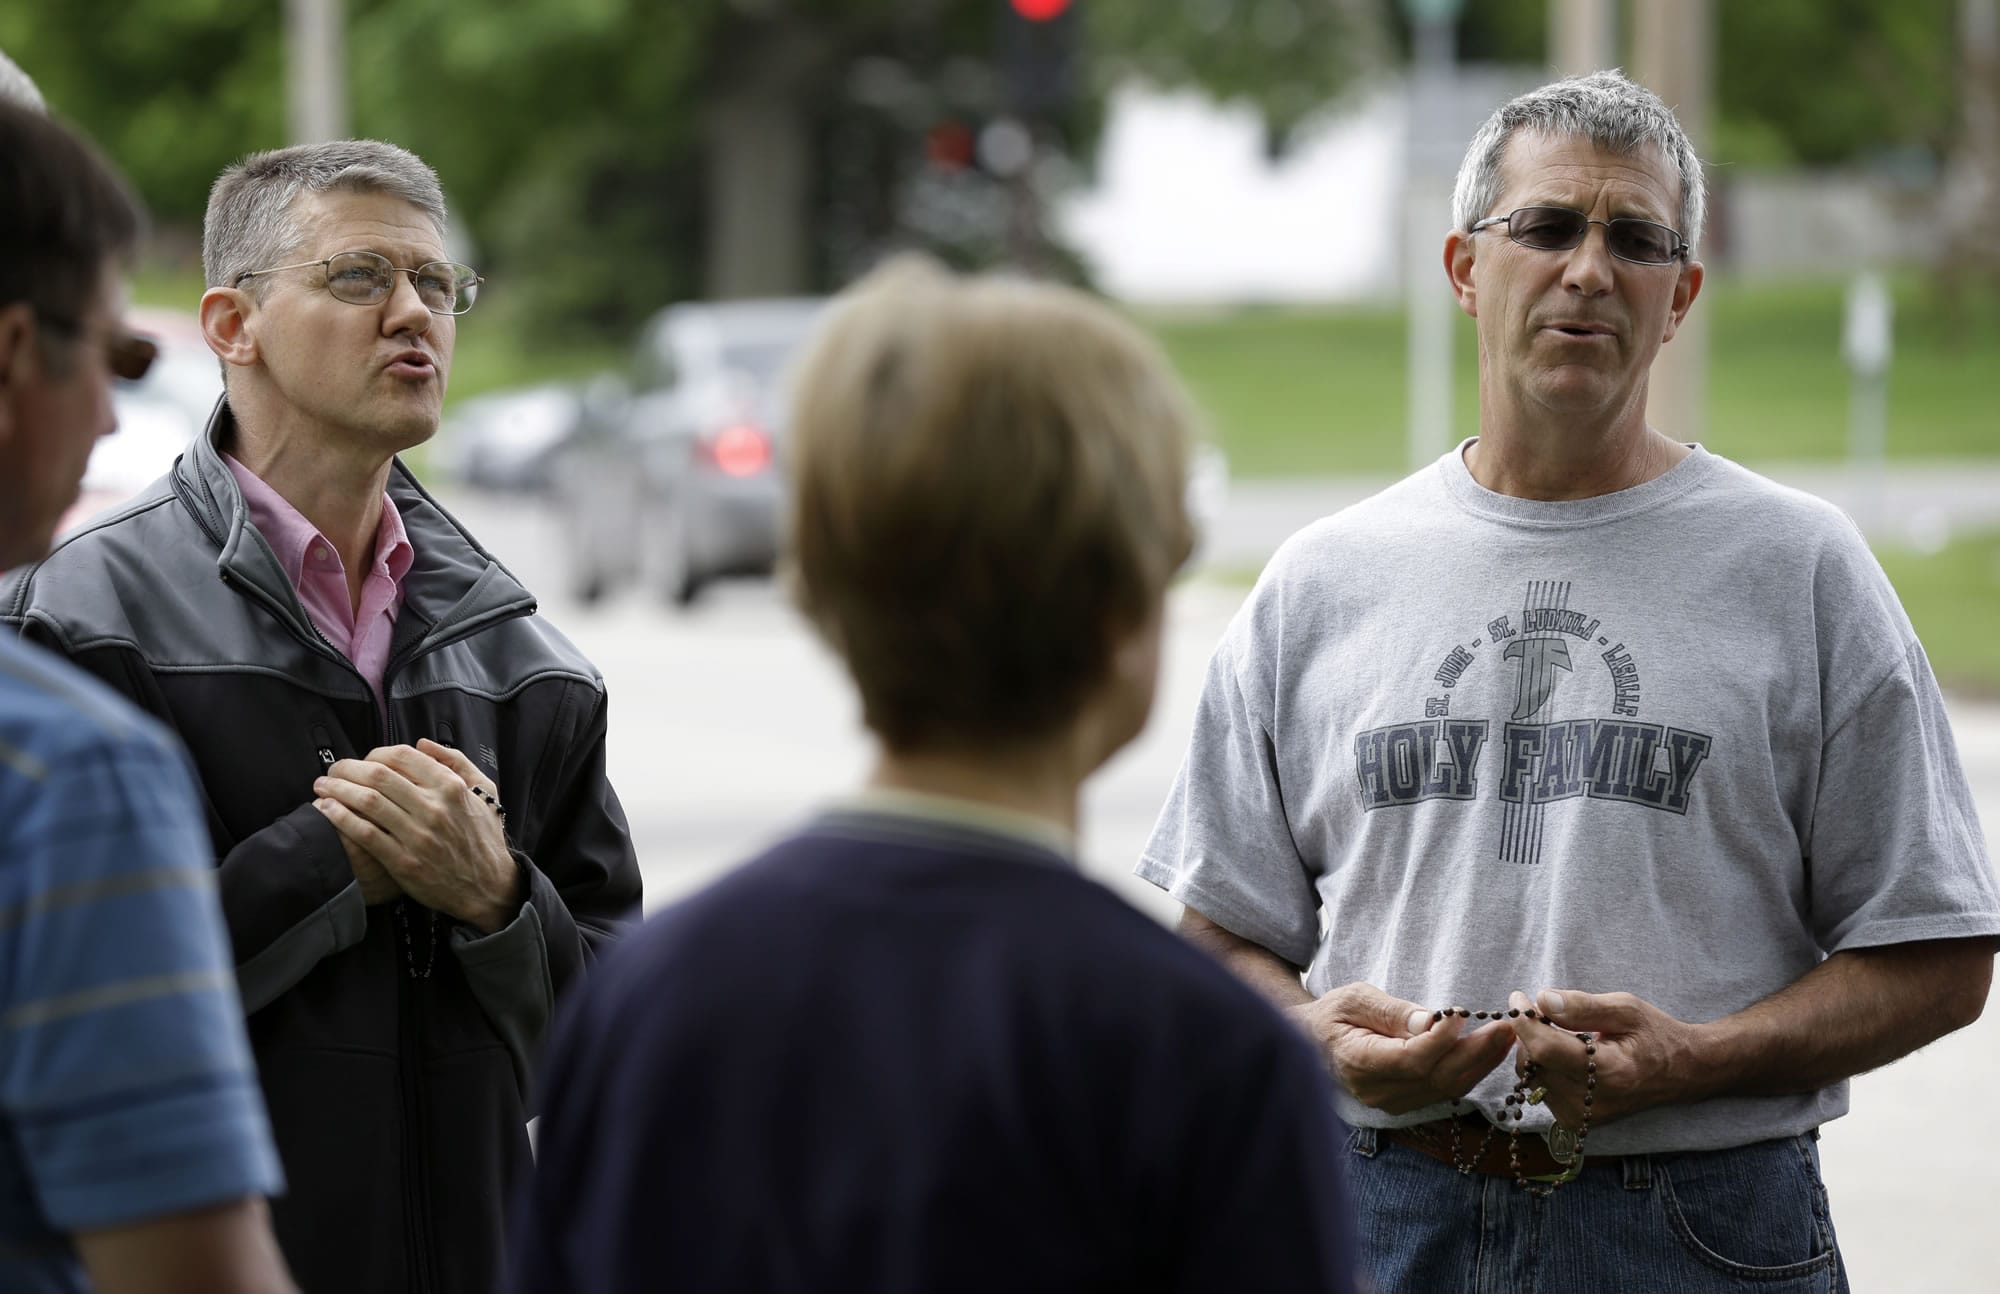 Coalition for Life of Iowa members Marty Lammers, left, and Ron Digmann pray the Rosary outside the Planned Parenthood clinic on Tuesday in Cedar Rapids, Iowa.